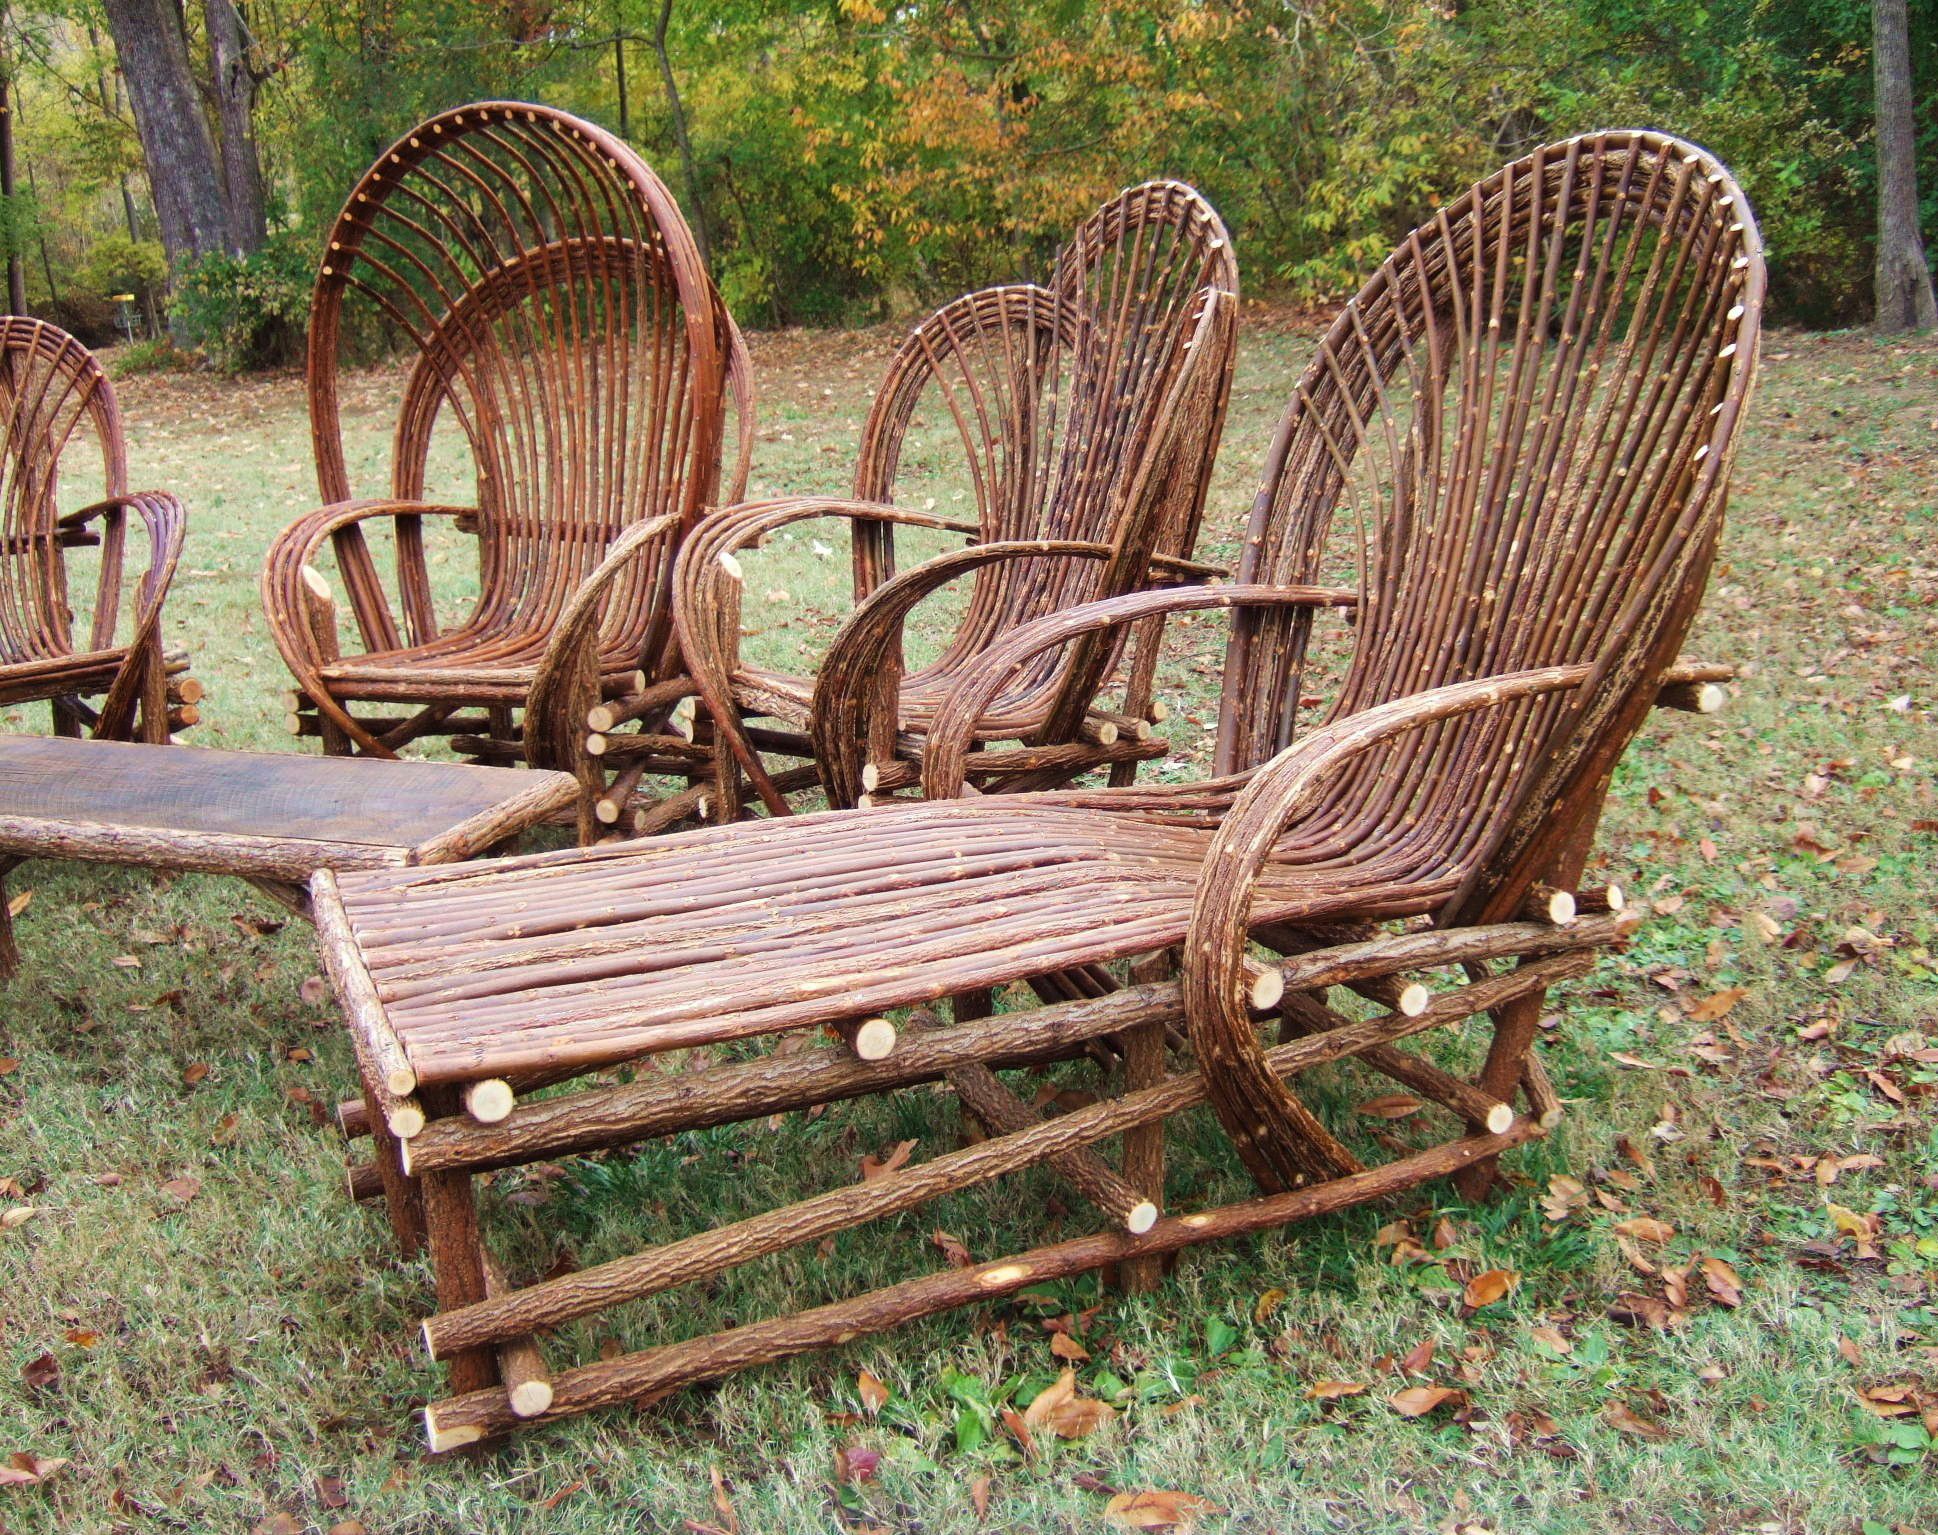 chairs and chaise loungers made with willow trees | DIY - Furniture ...